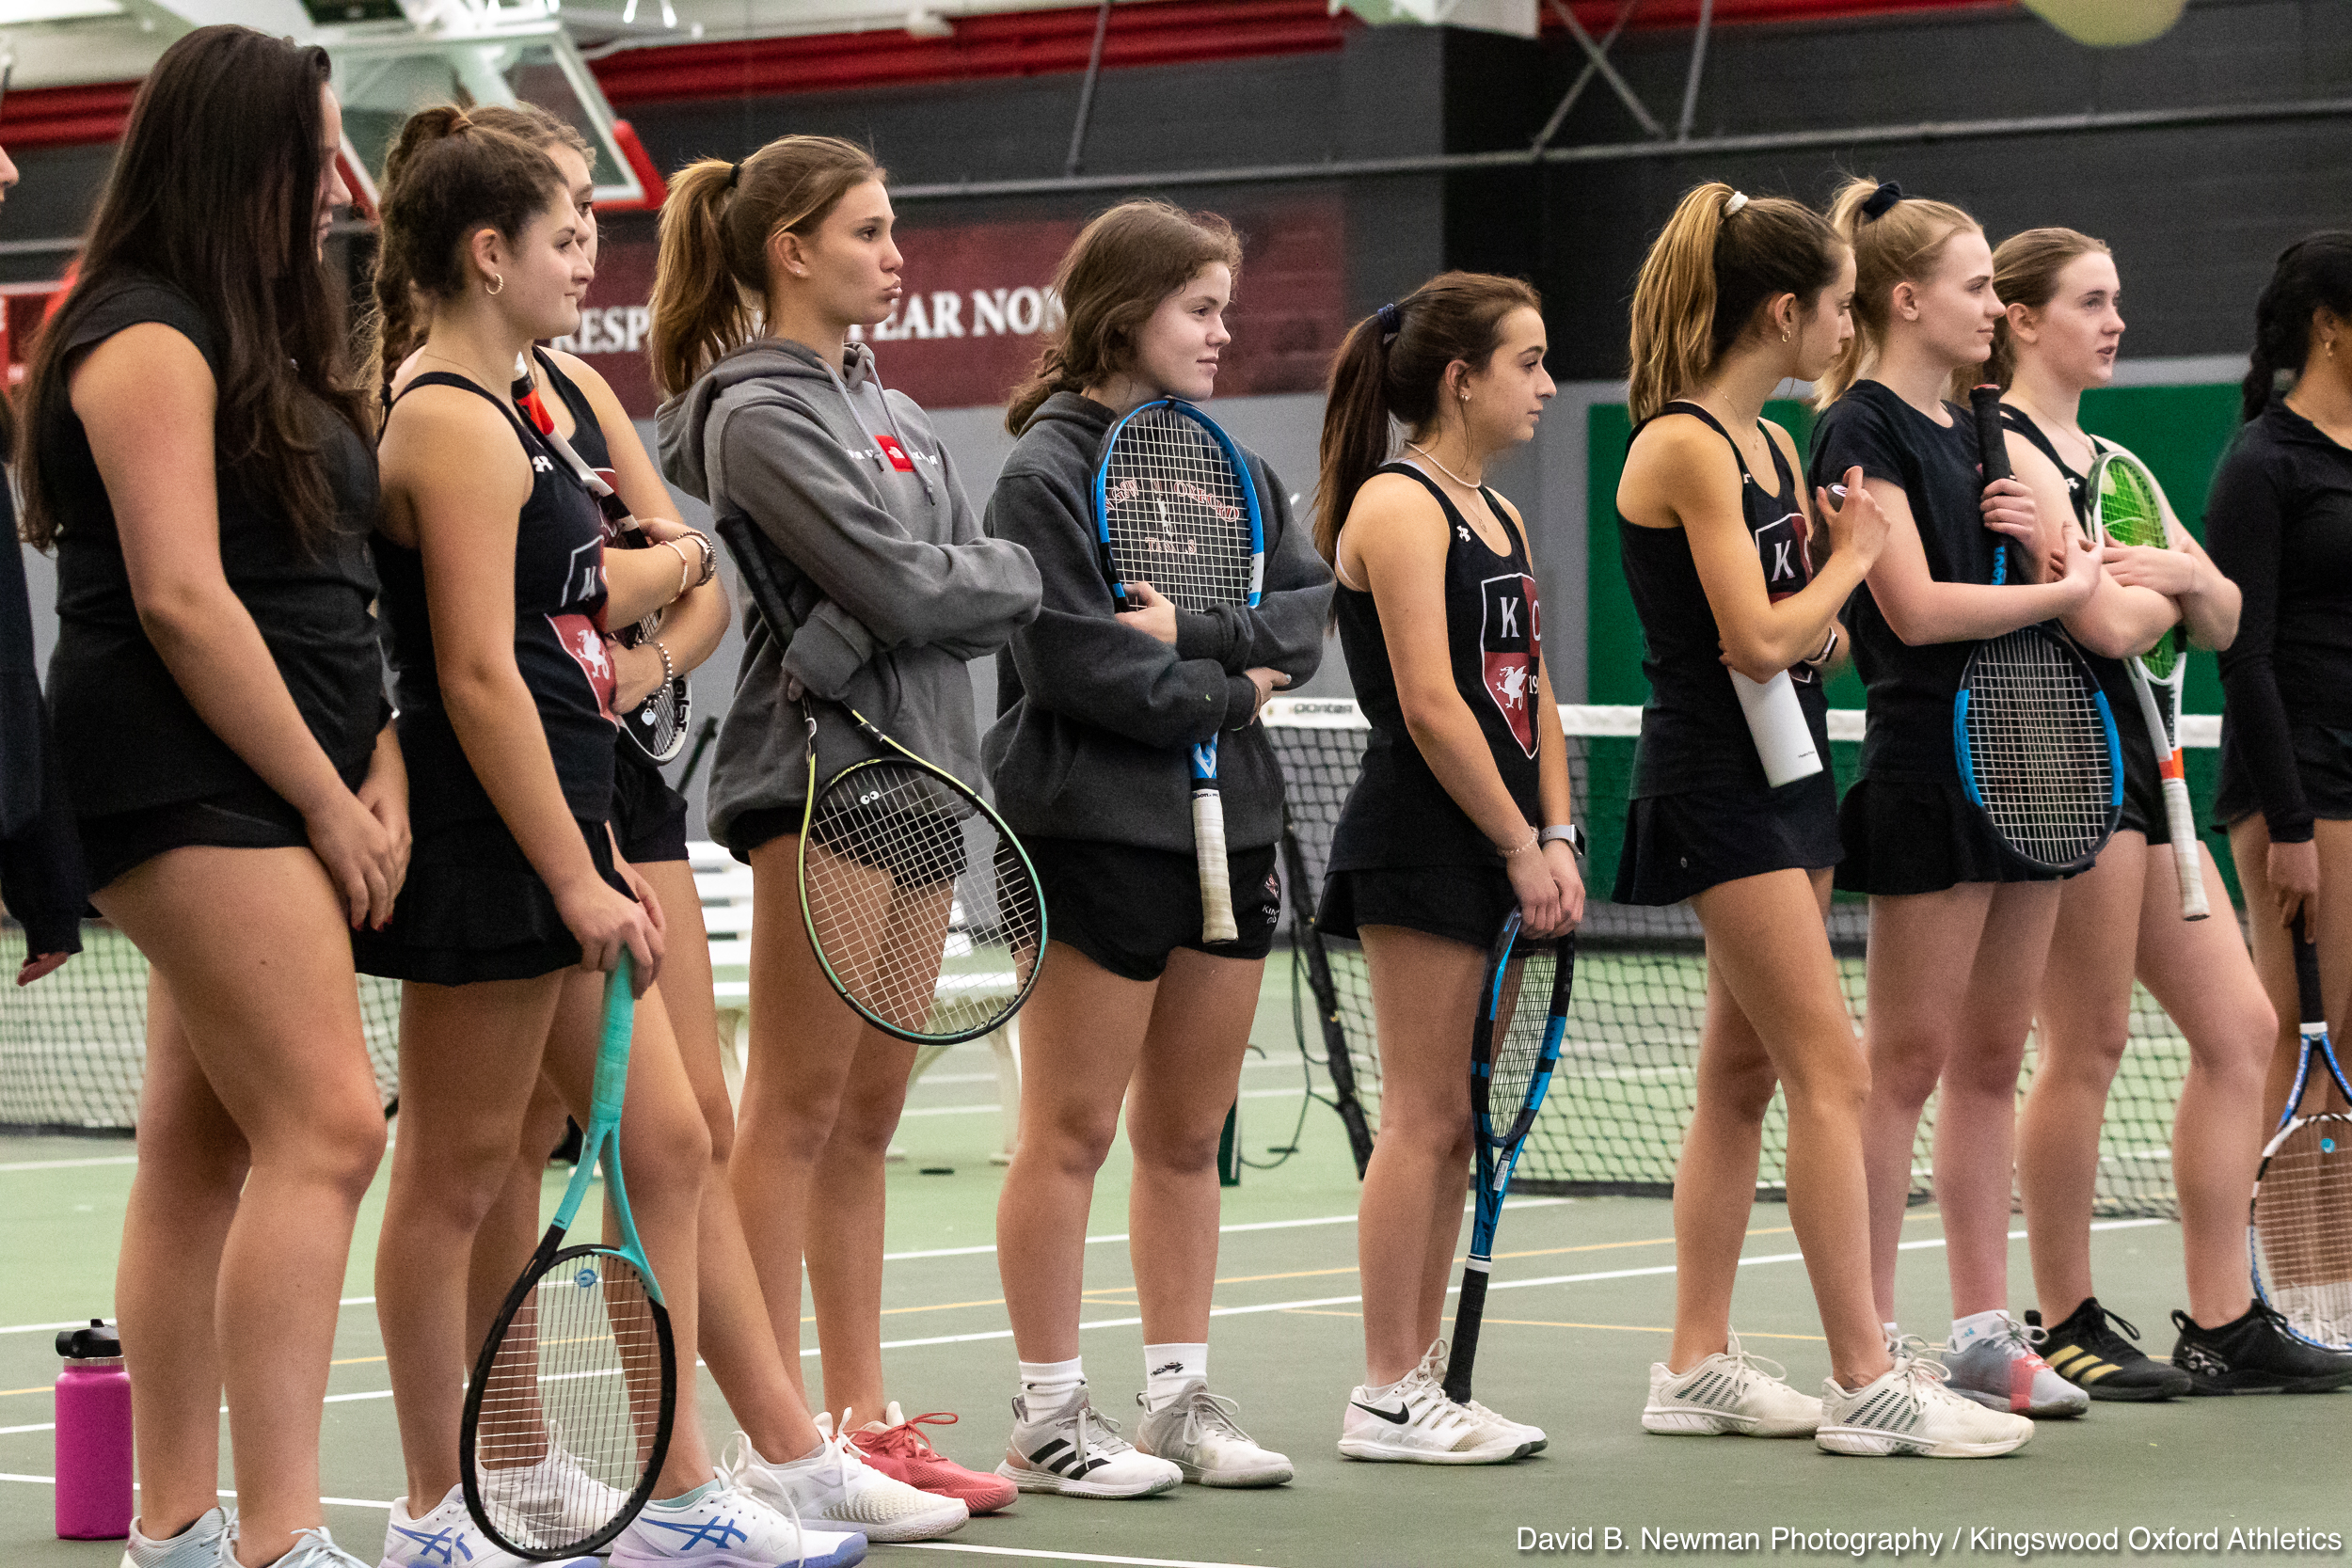 Girls play competitive sports and tennis at Kingswood Oxford in West Hartford